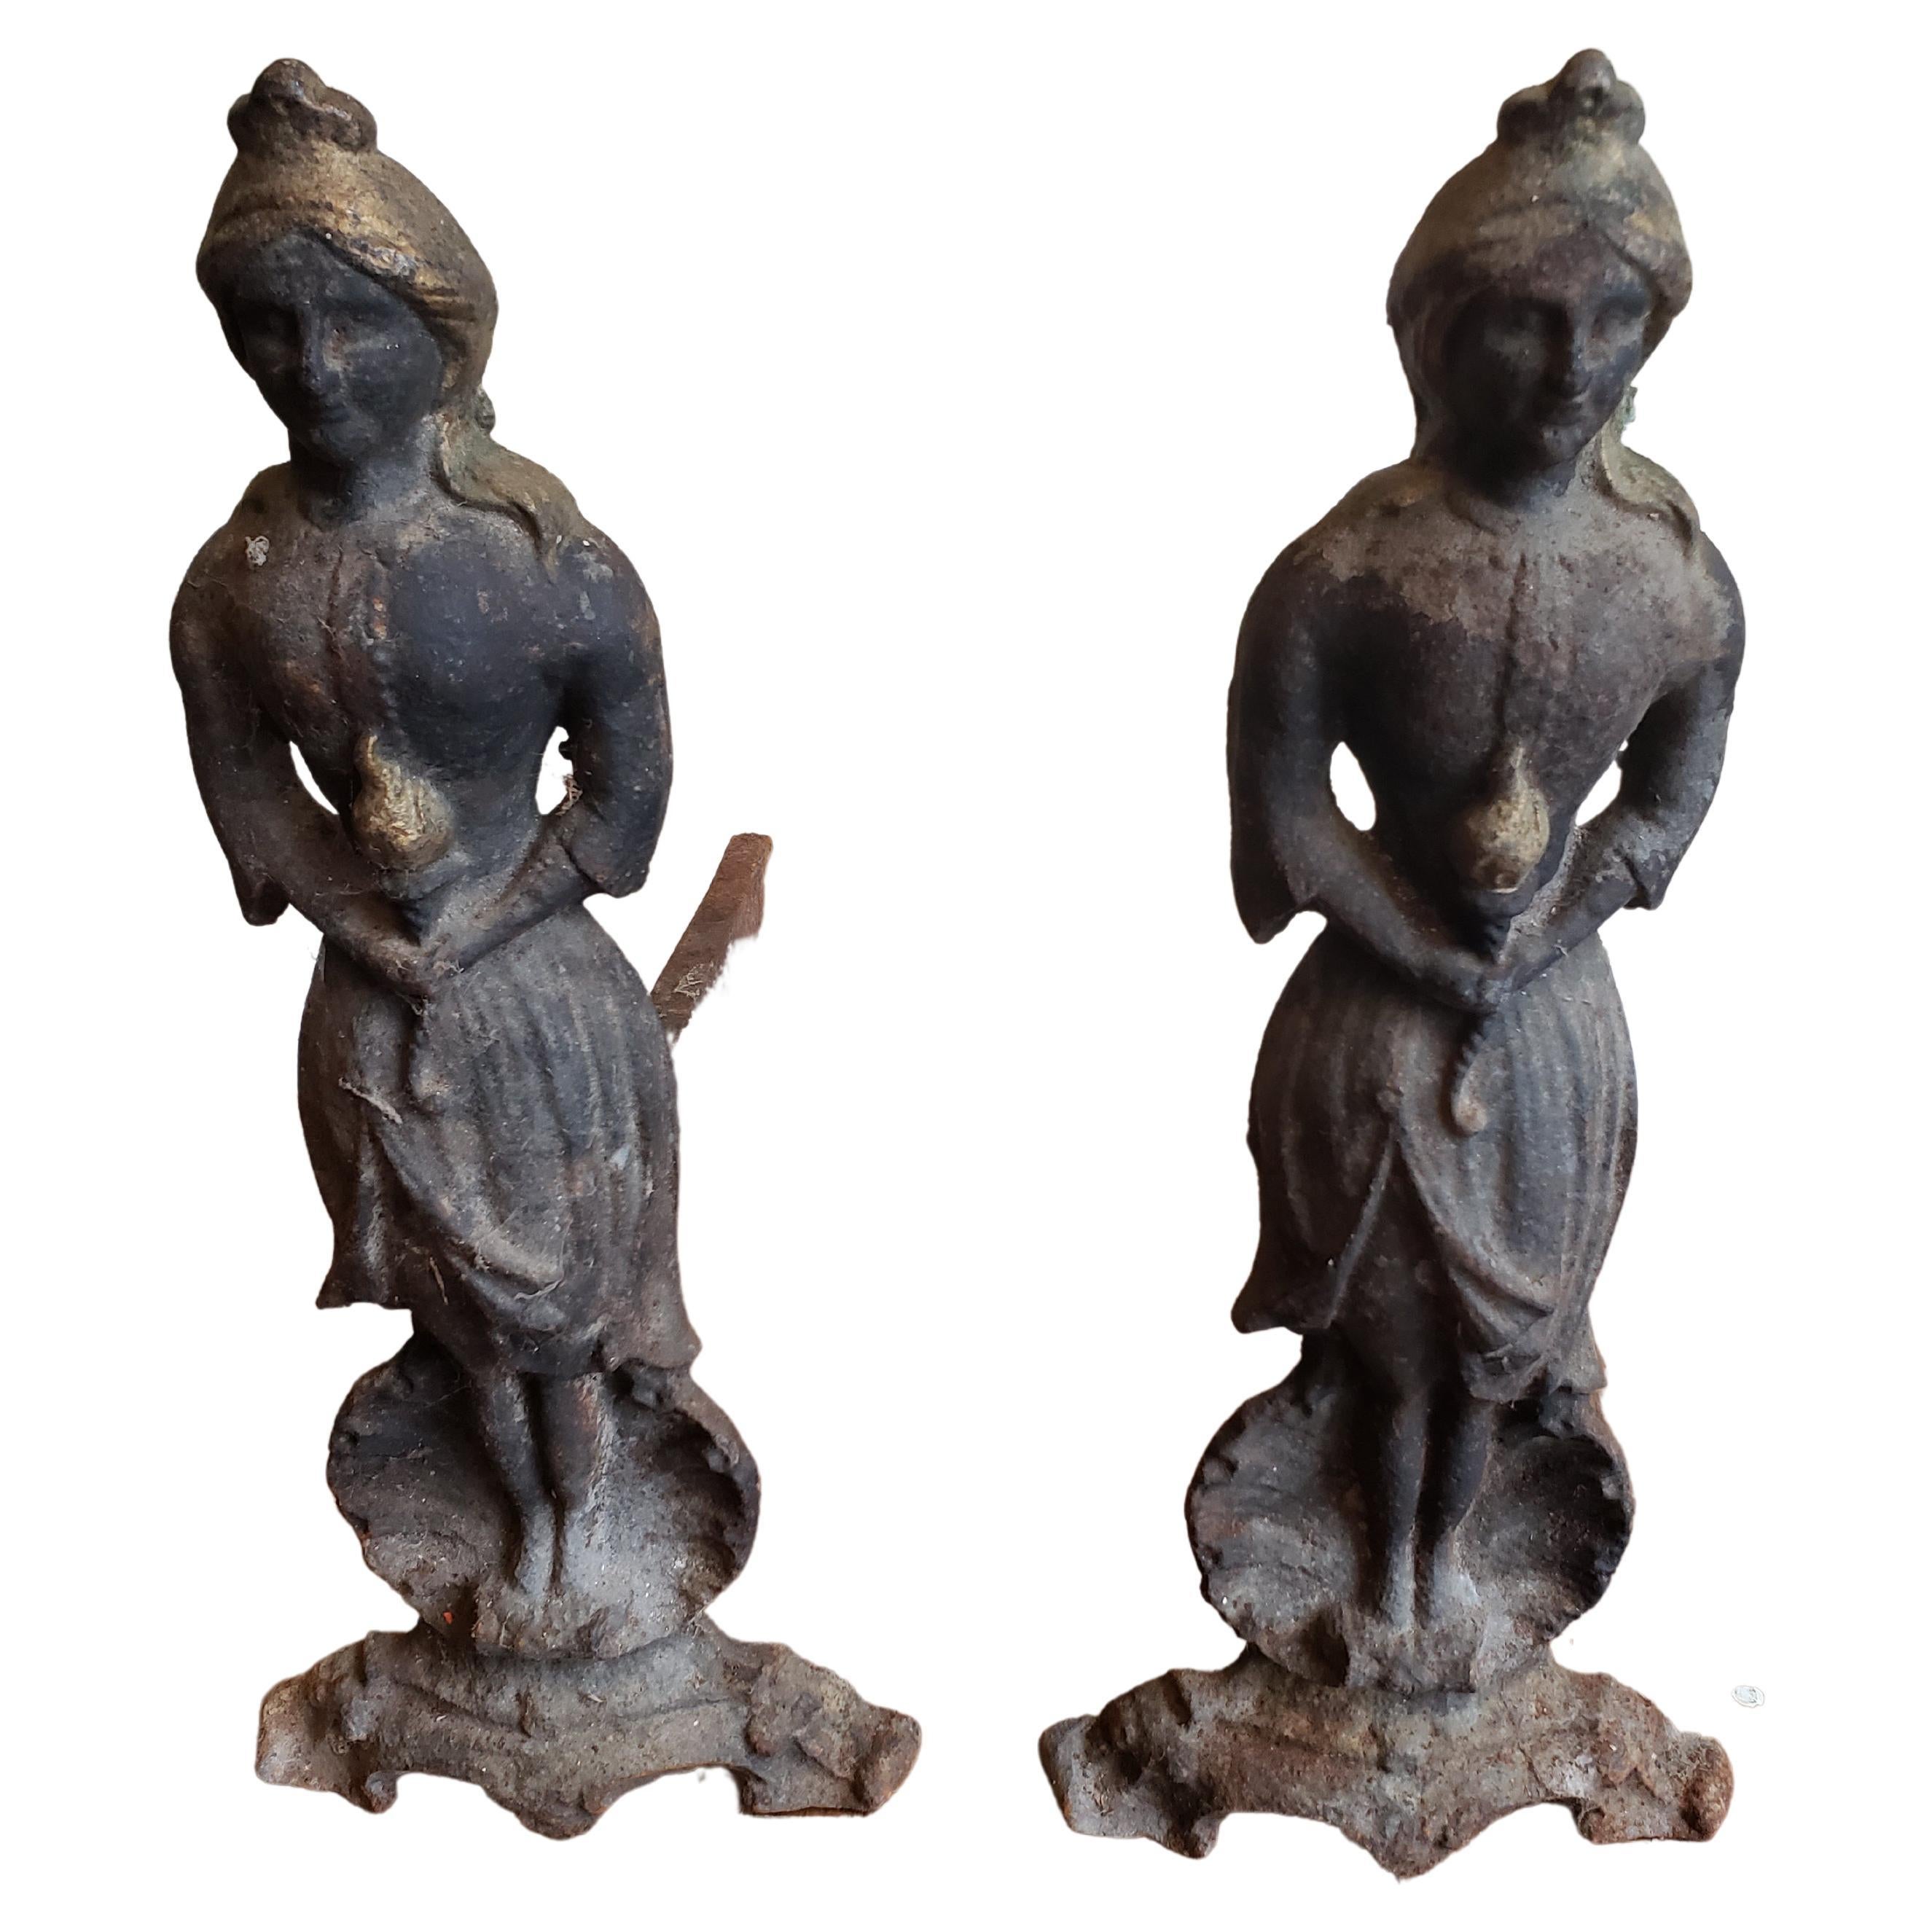 Pair of antique figural cast and wrought iron fireplace Andersons, Circa 1860s,
Measure 7.5